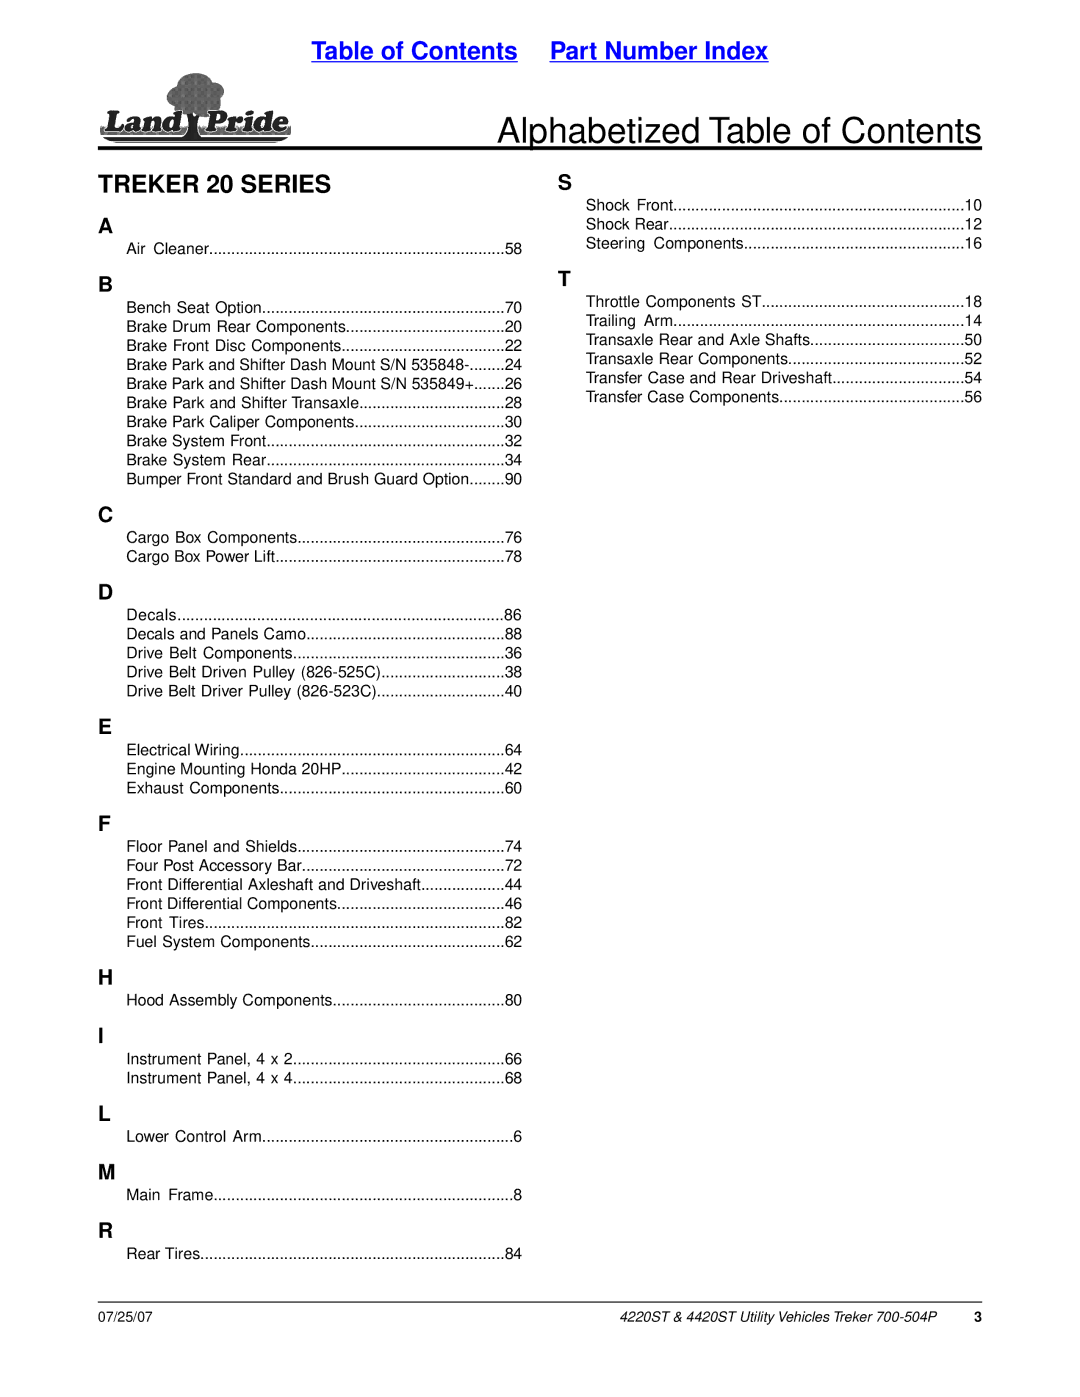 Land Pride 4220ST, 4420ST manual Alphabetized Table of Contents 